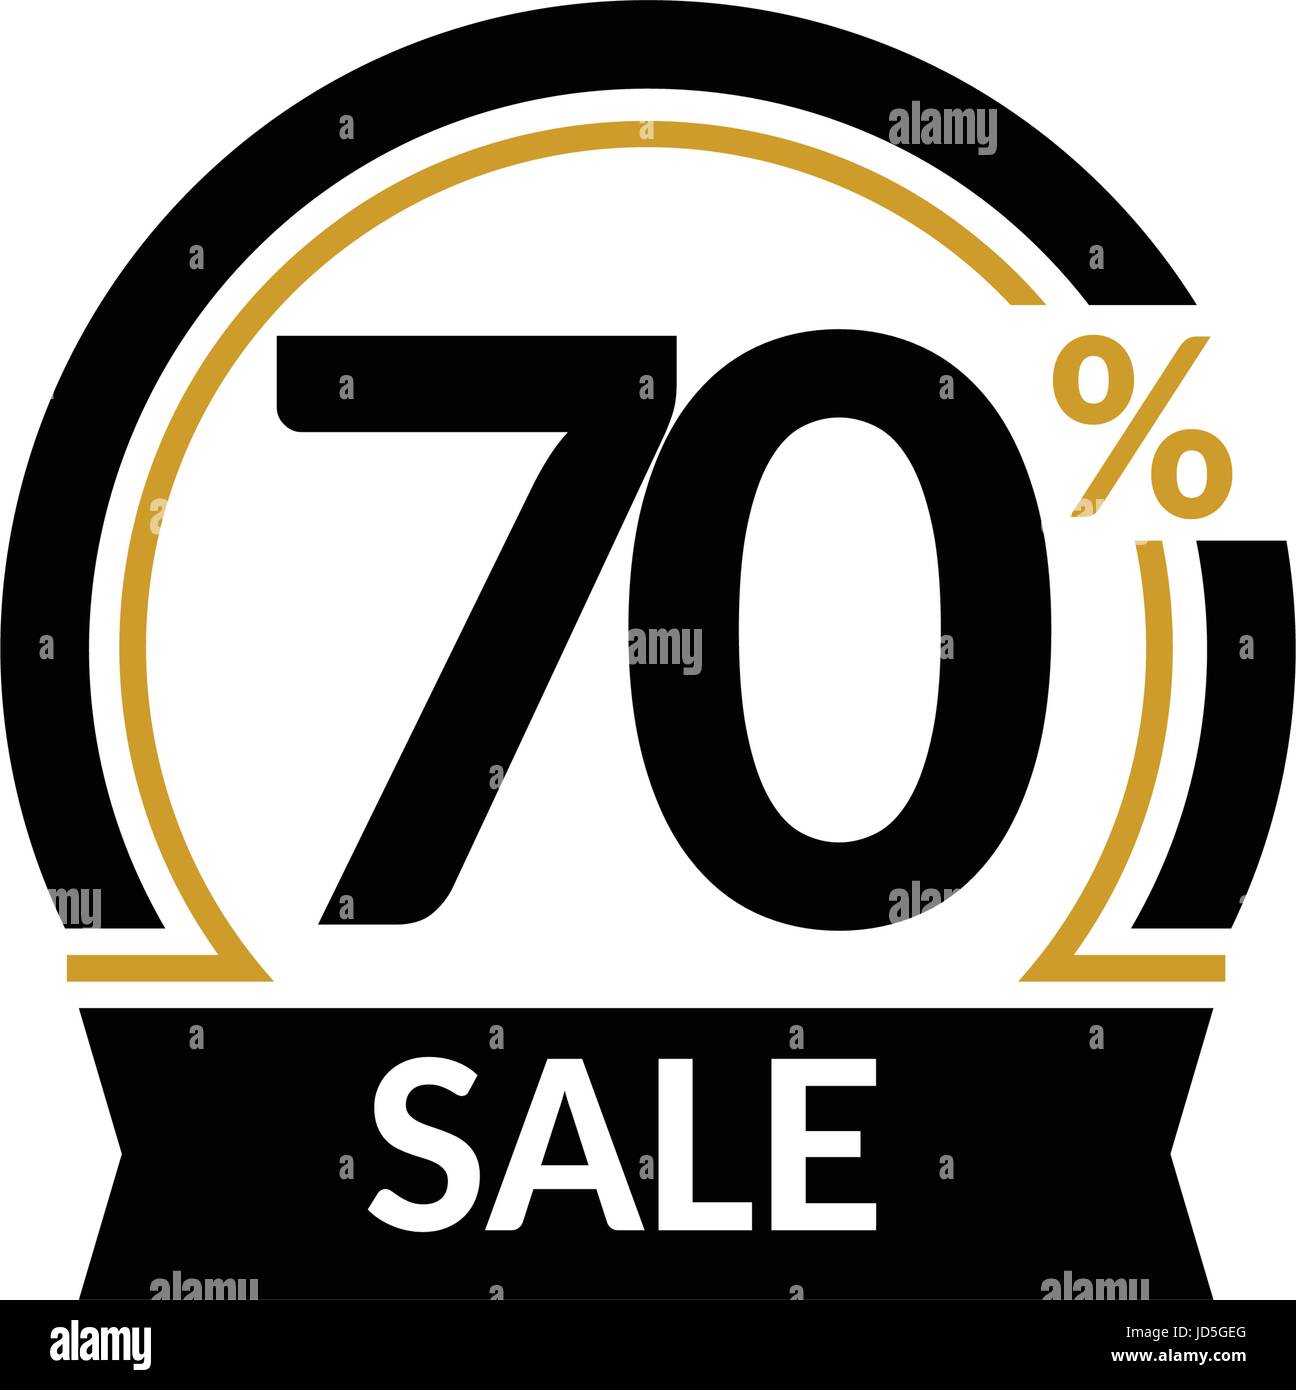 Discount card with 70 percent sale. Advertising Sale vector isolated sign. Promotion Stylish logo design under the black and gold arch Stock Vector